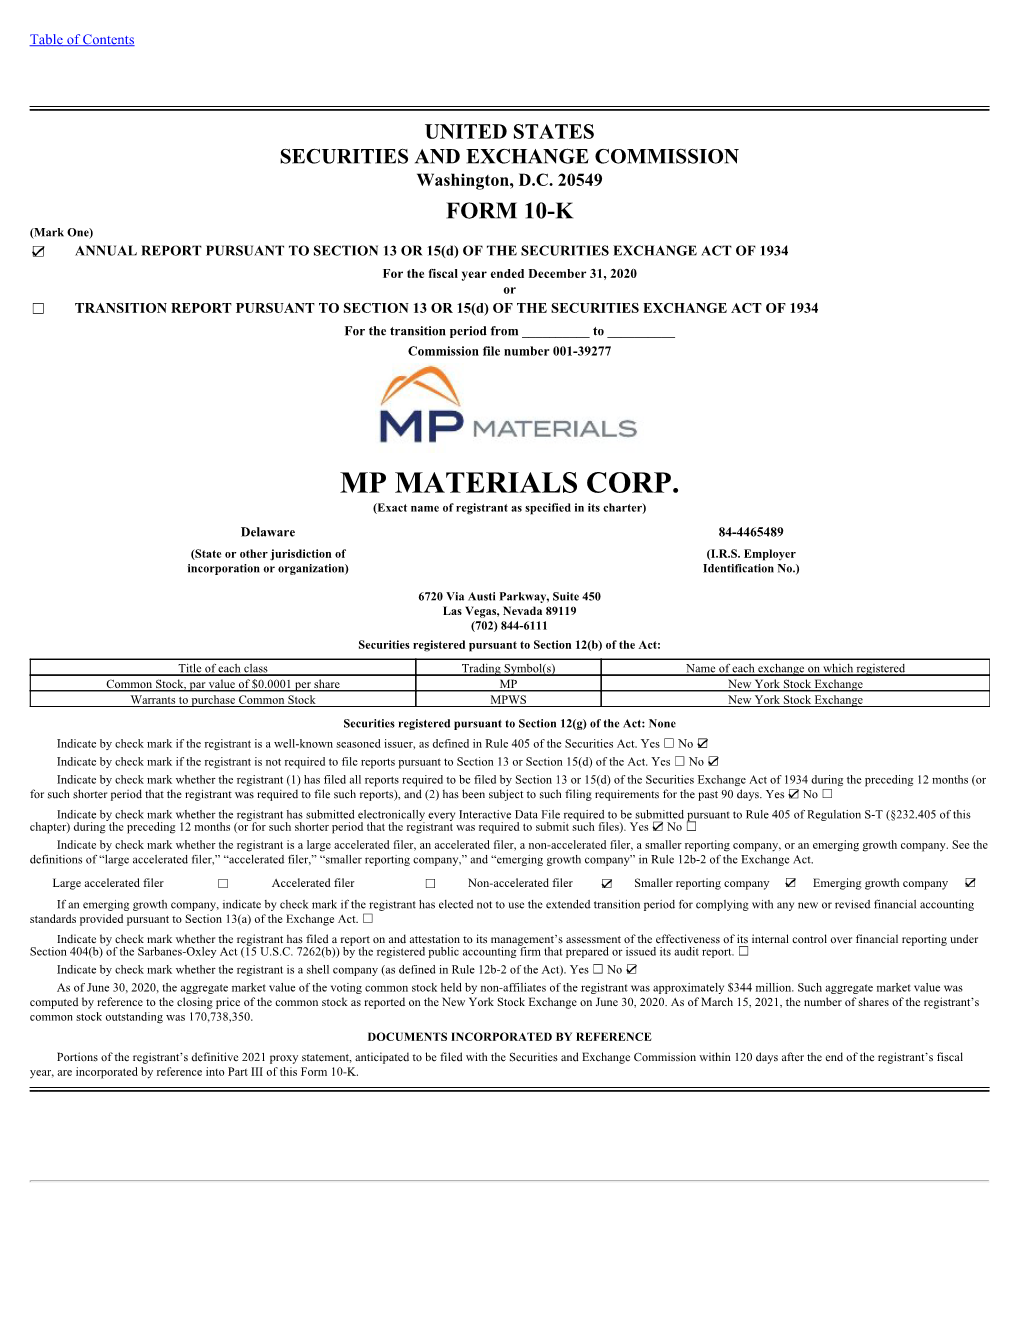 MP MATERIALS CORP. (Exact Name of Registrant As Specified in Its Charter) Delaware 84-4465489 (State Or Other Jurisdiction of (I.R.S